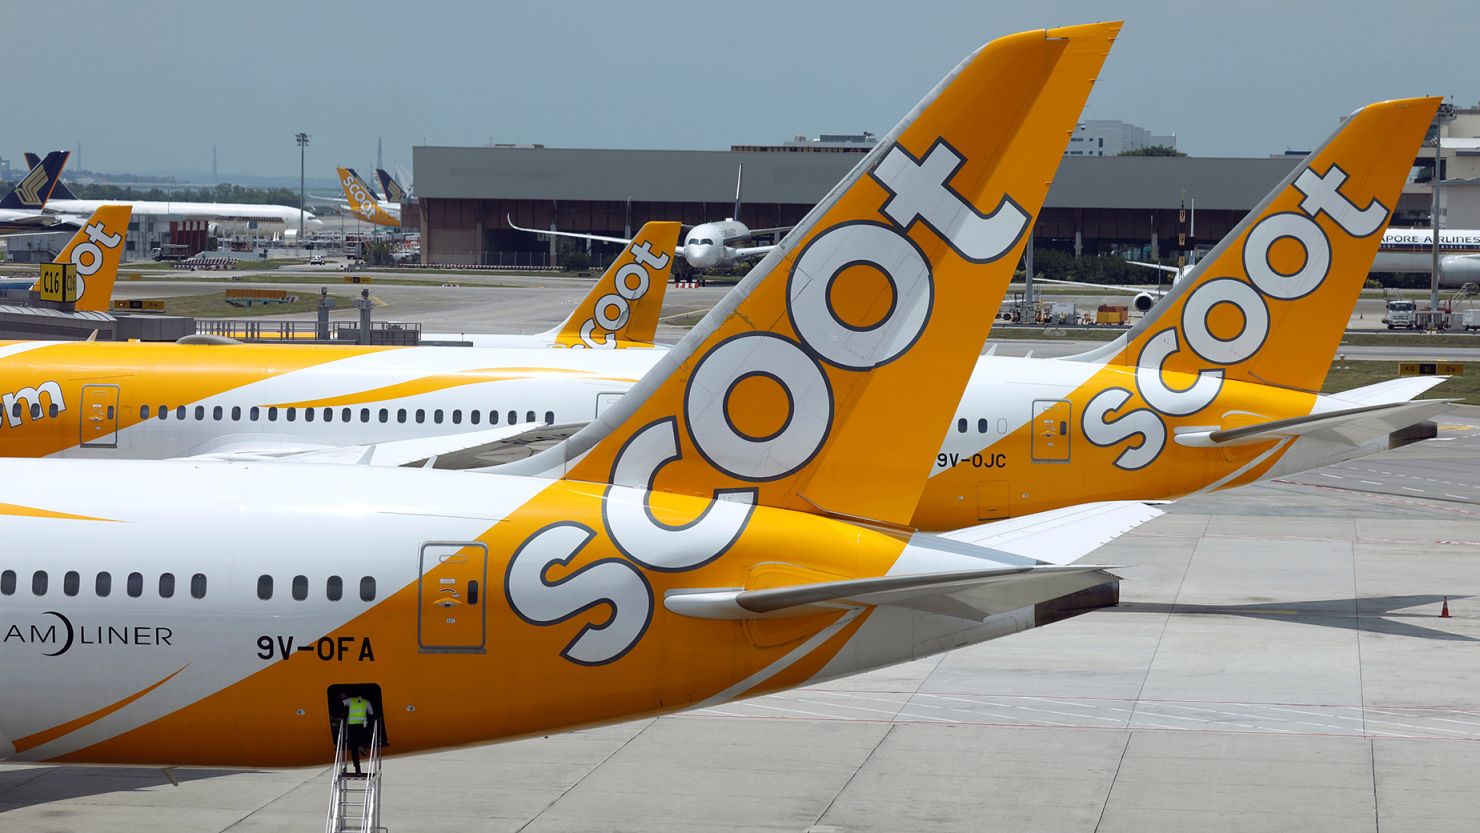 Scoot planes on the tarmac at Singapore's Changi Airport.